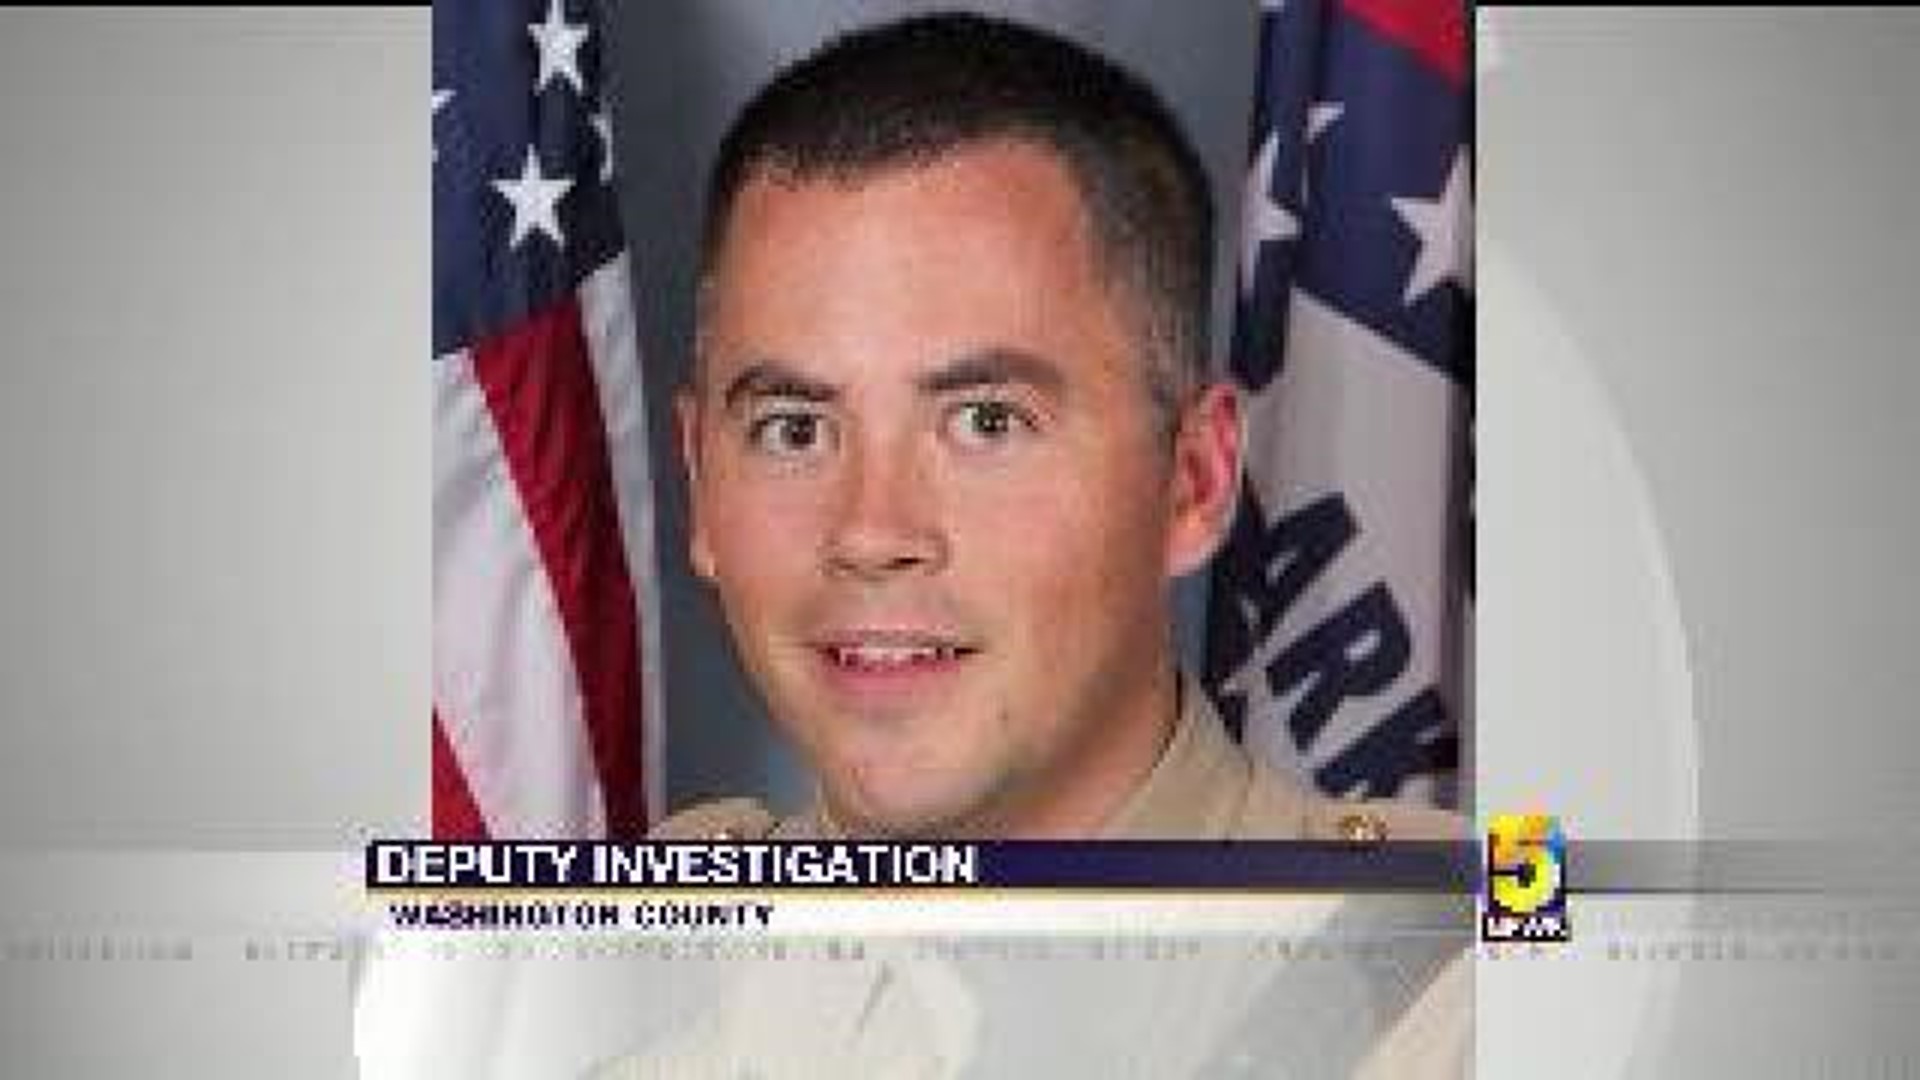 Deputy Lied About Not Drinking Before Wrecking Patrol Vehicle, Report States